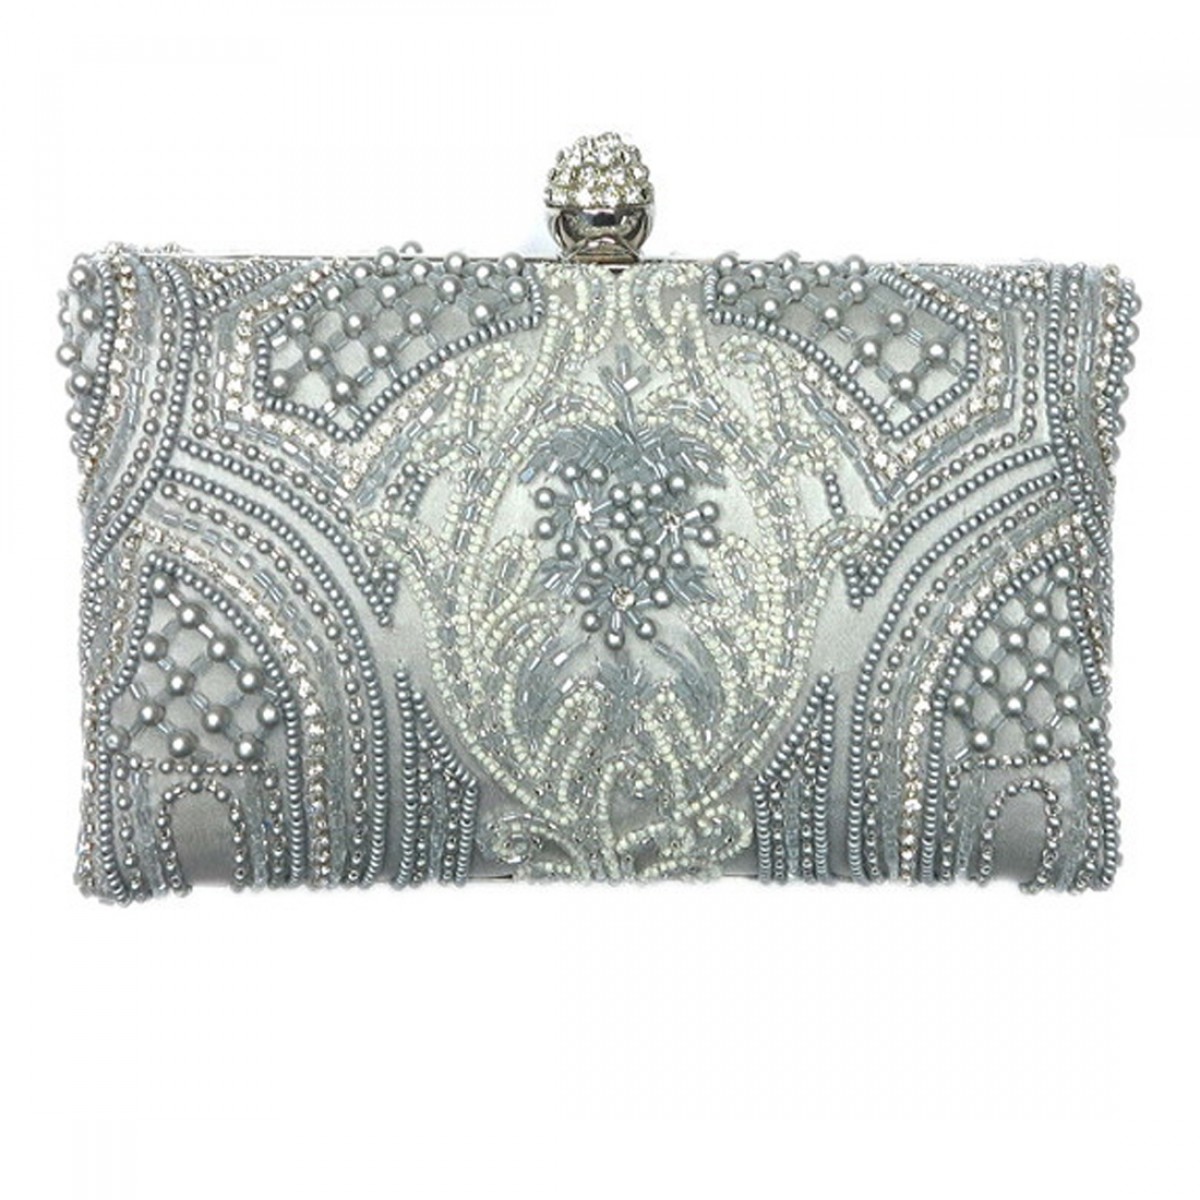 Intricate Pearls & Crystal Box Clutch